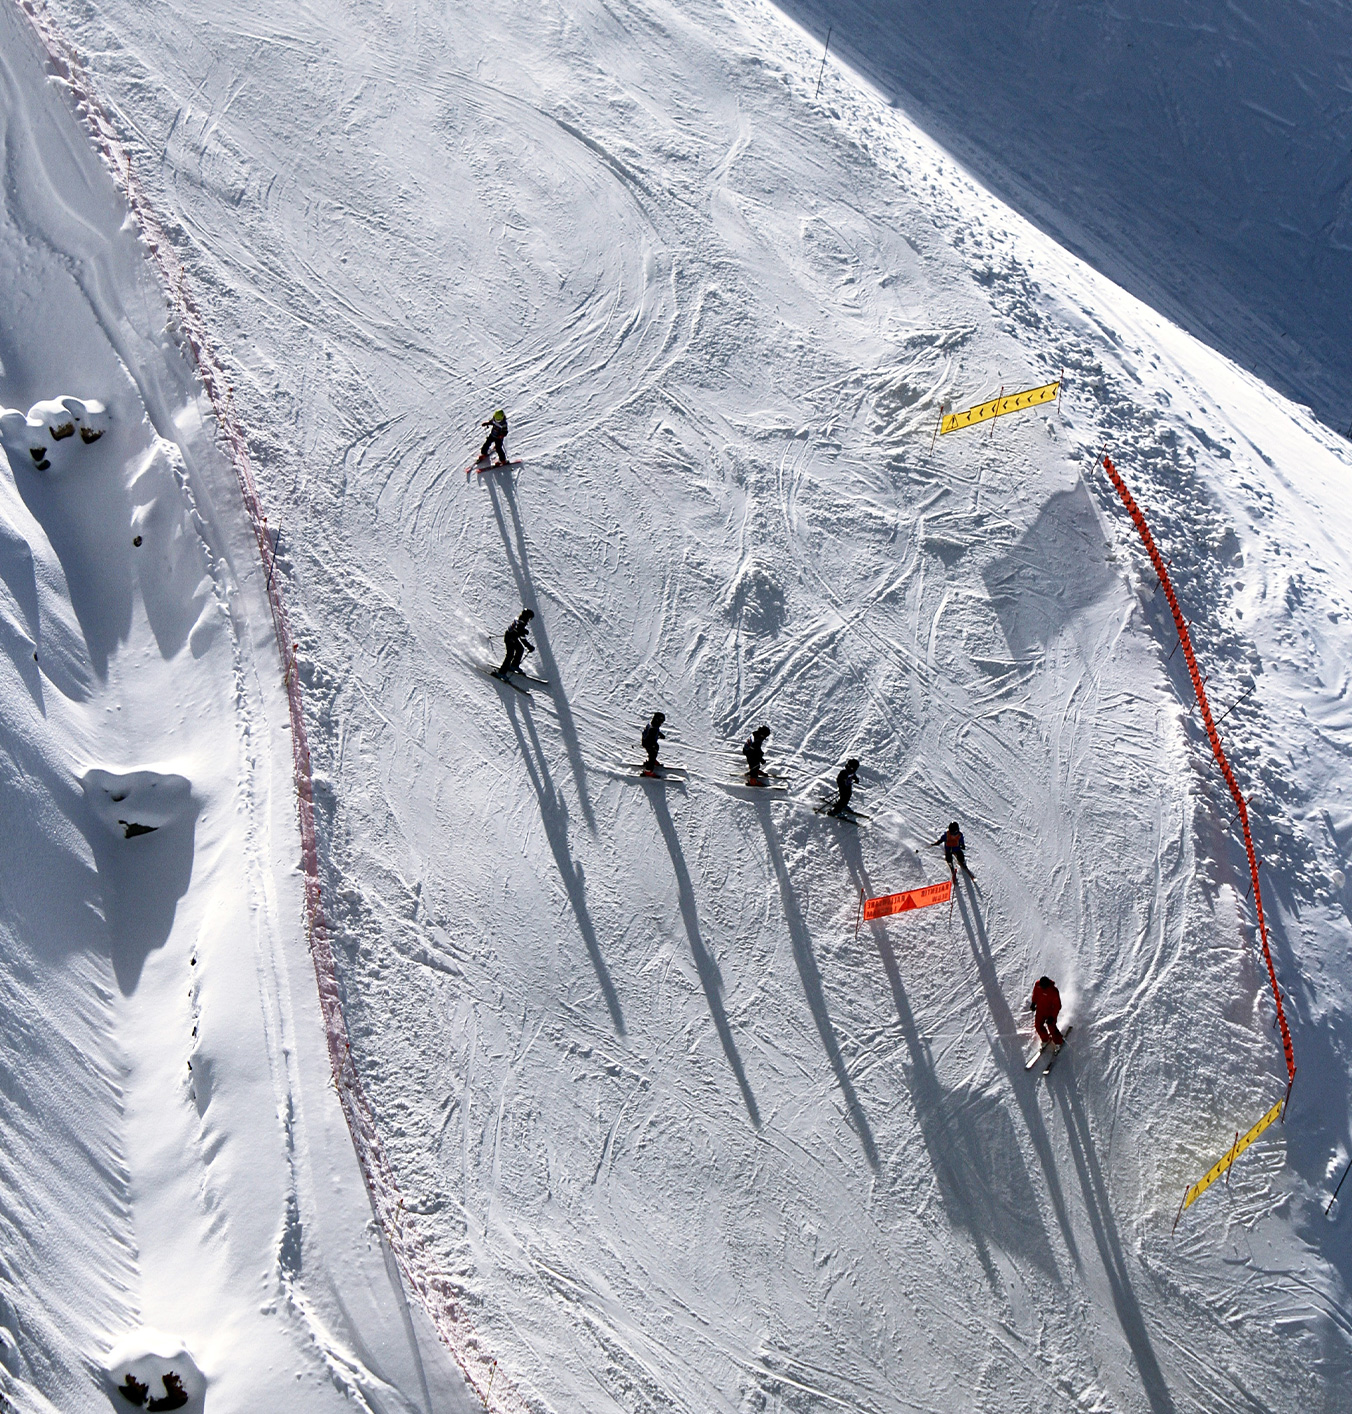 “Why I quit my city job to train as a ski instructor”